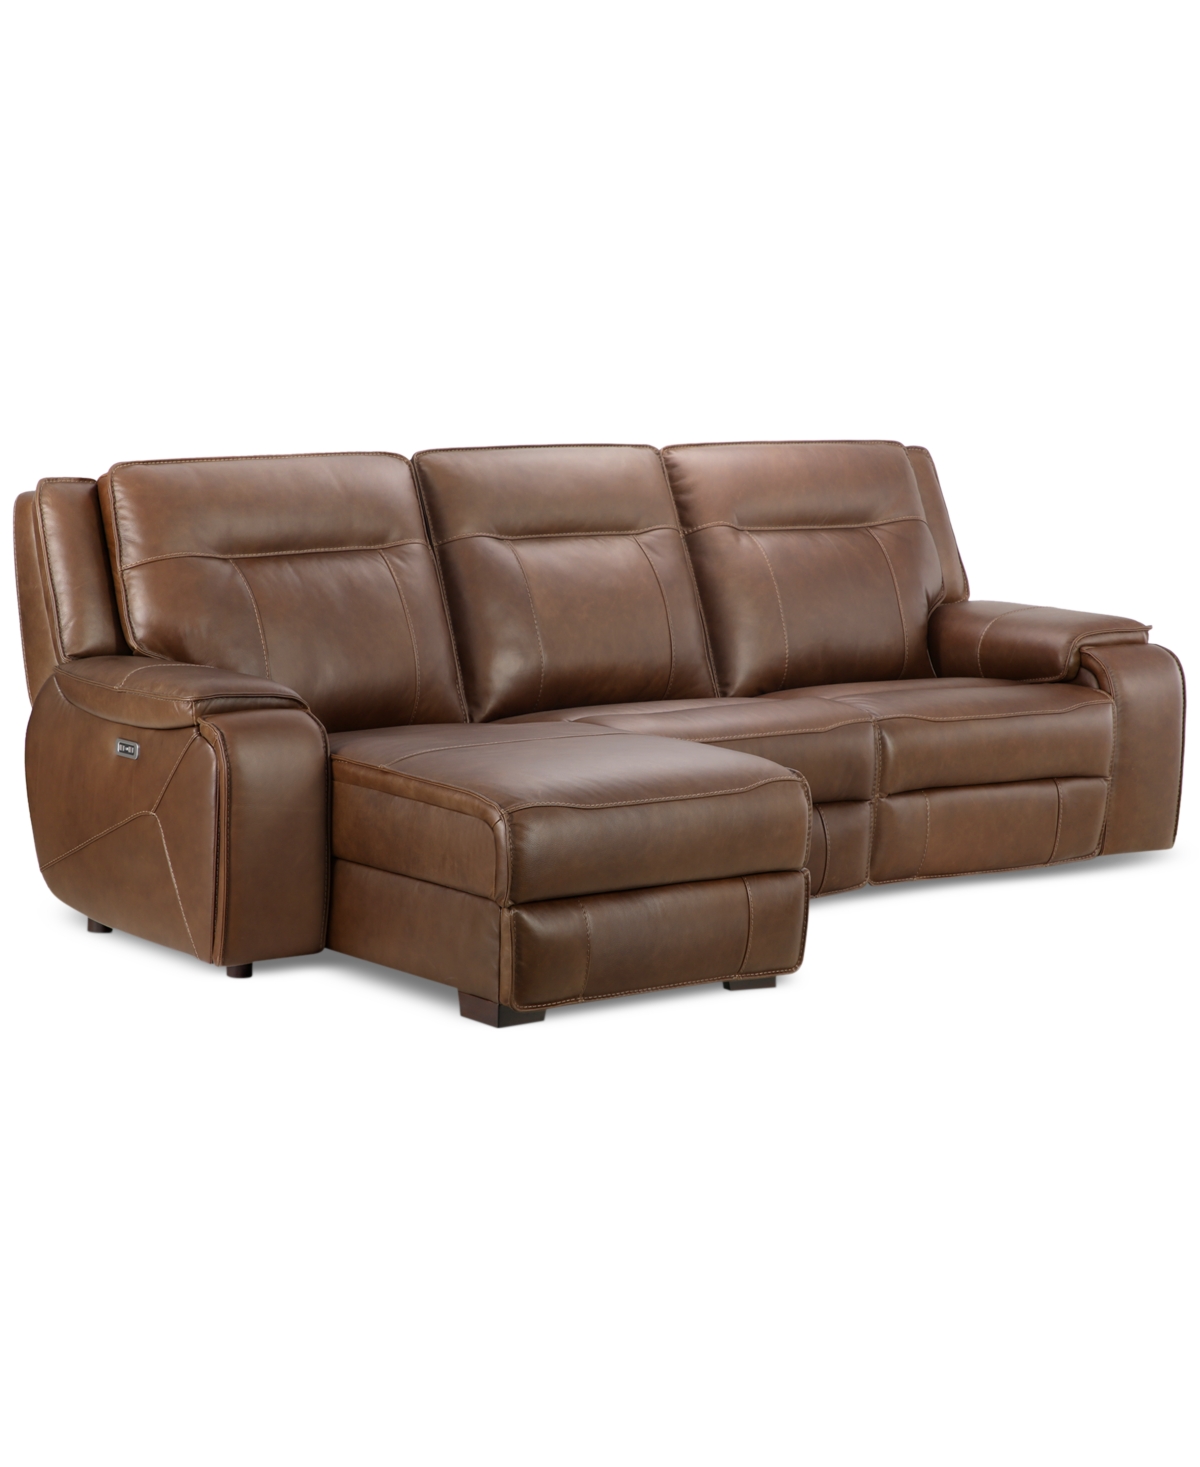 Macy's Hansley 3-pc Zero Gravity Leather Sofa With 2 Power Recliners And Chaise, Created For  In Brown